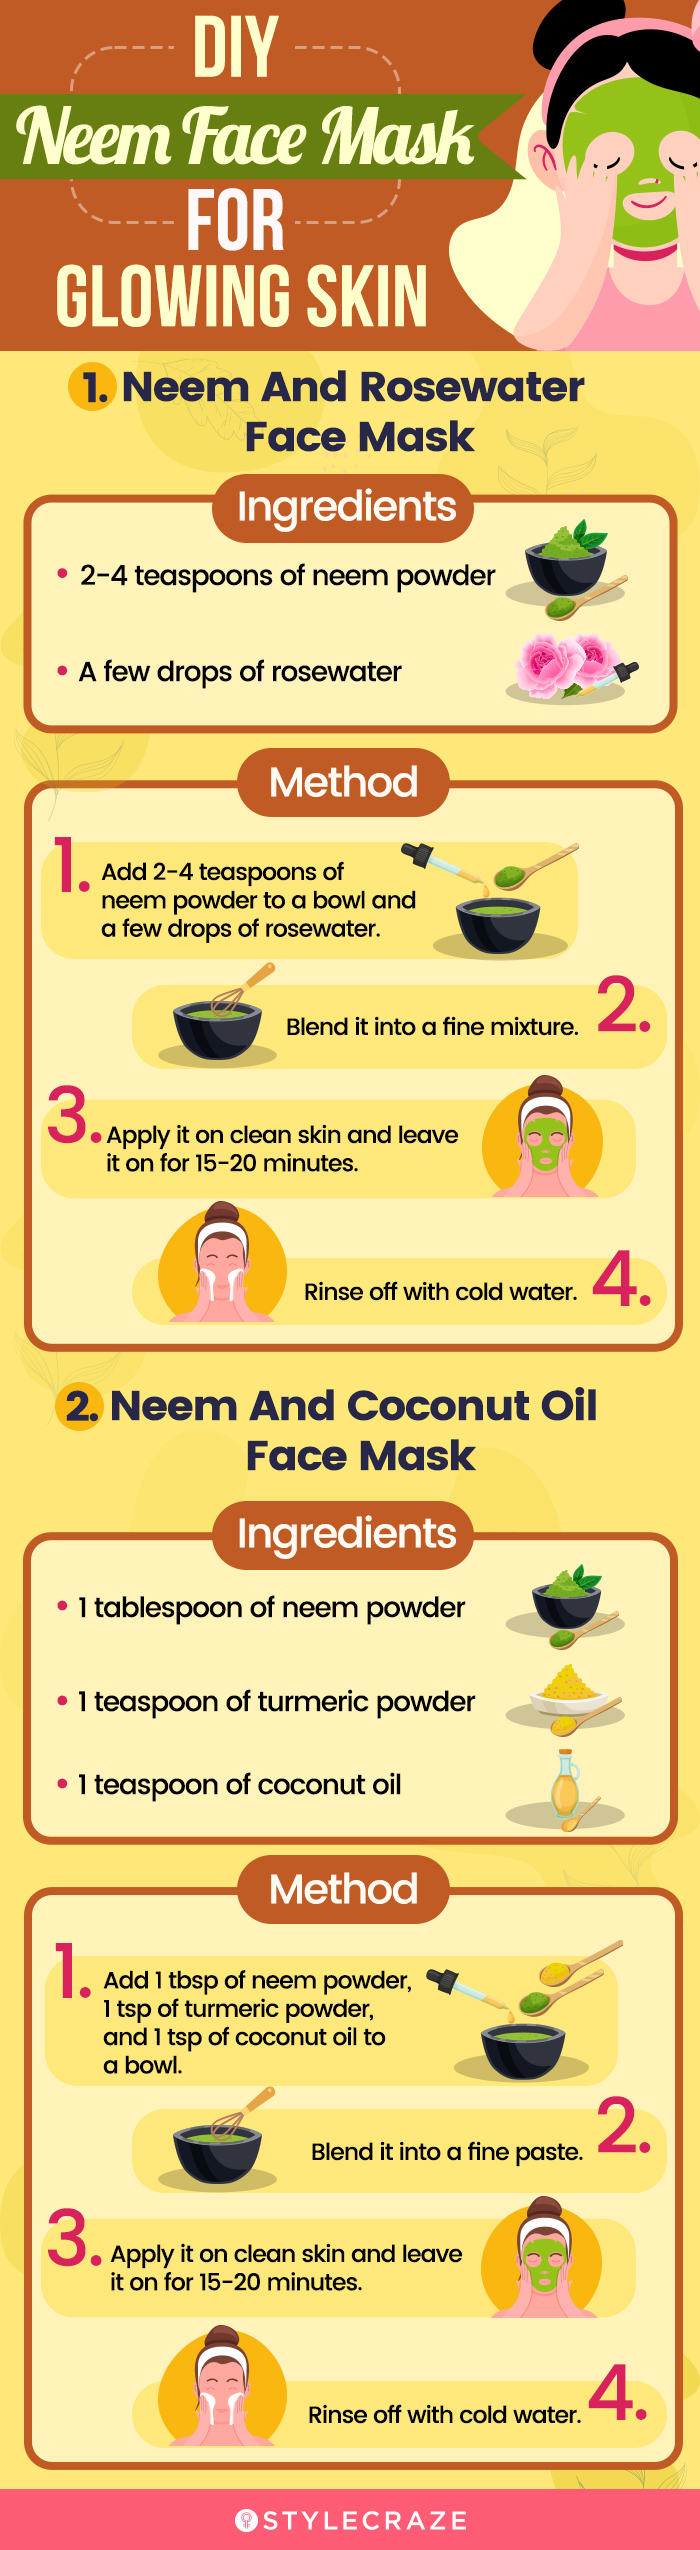 diy neem face mask for glowing skin [infographic]